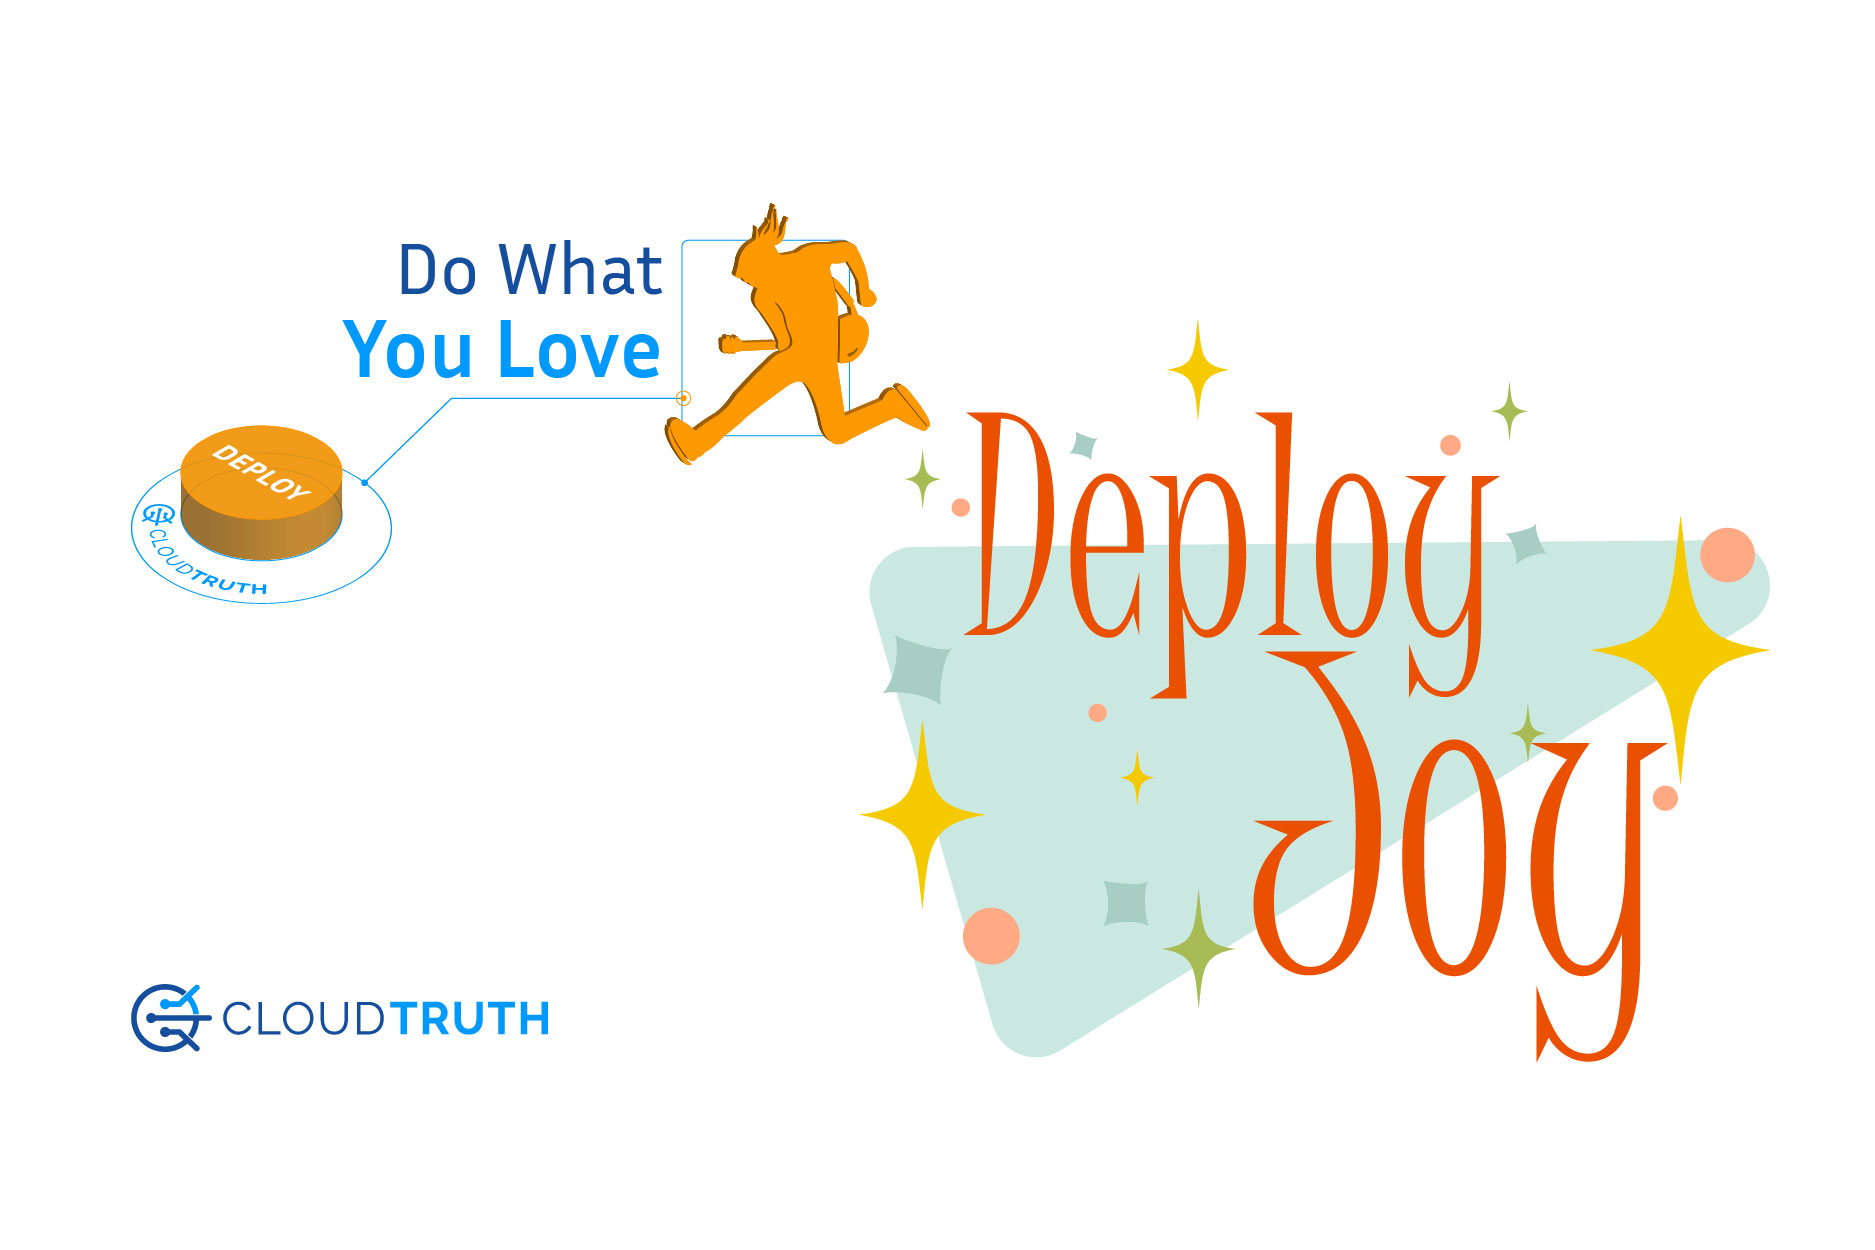 Deploy Joy: More Time to Build Powerful Code & Delight Users